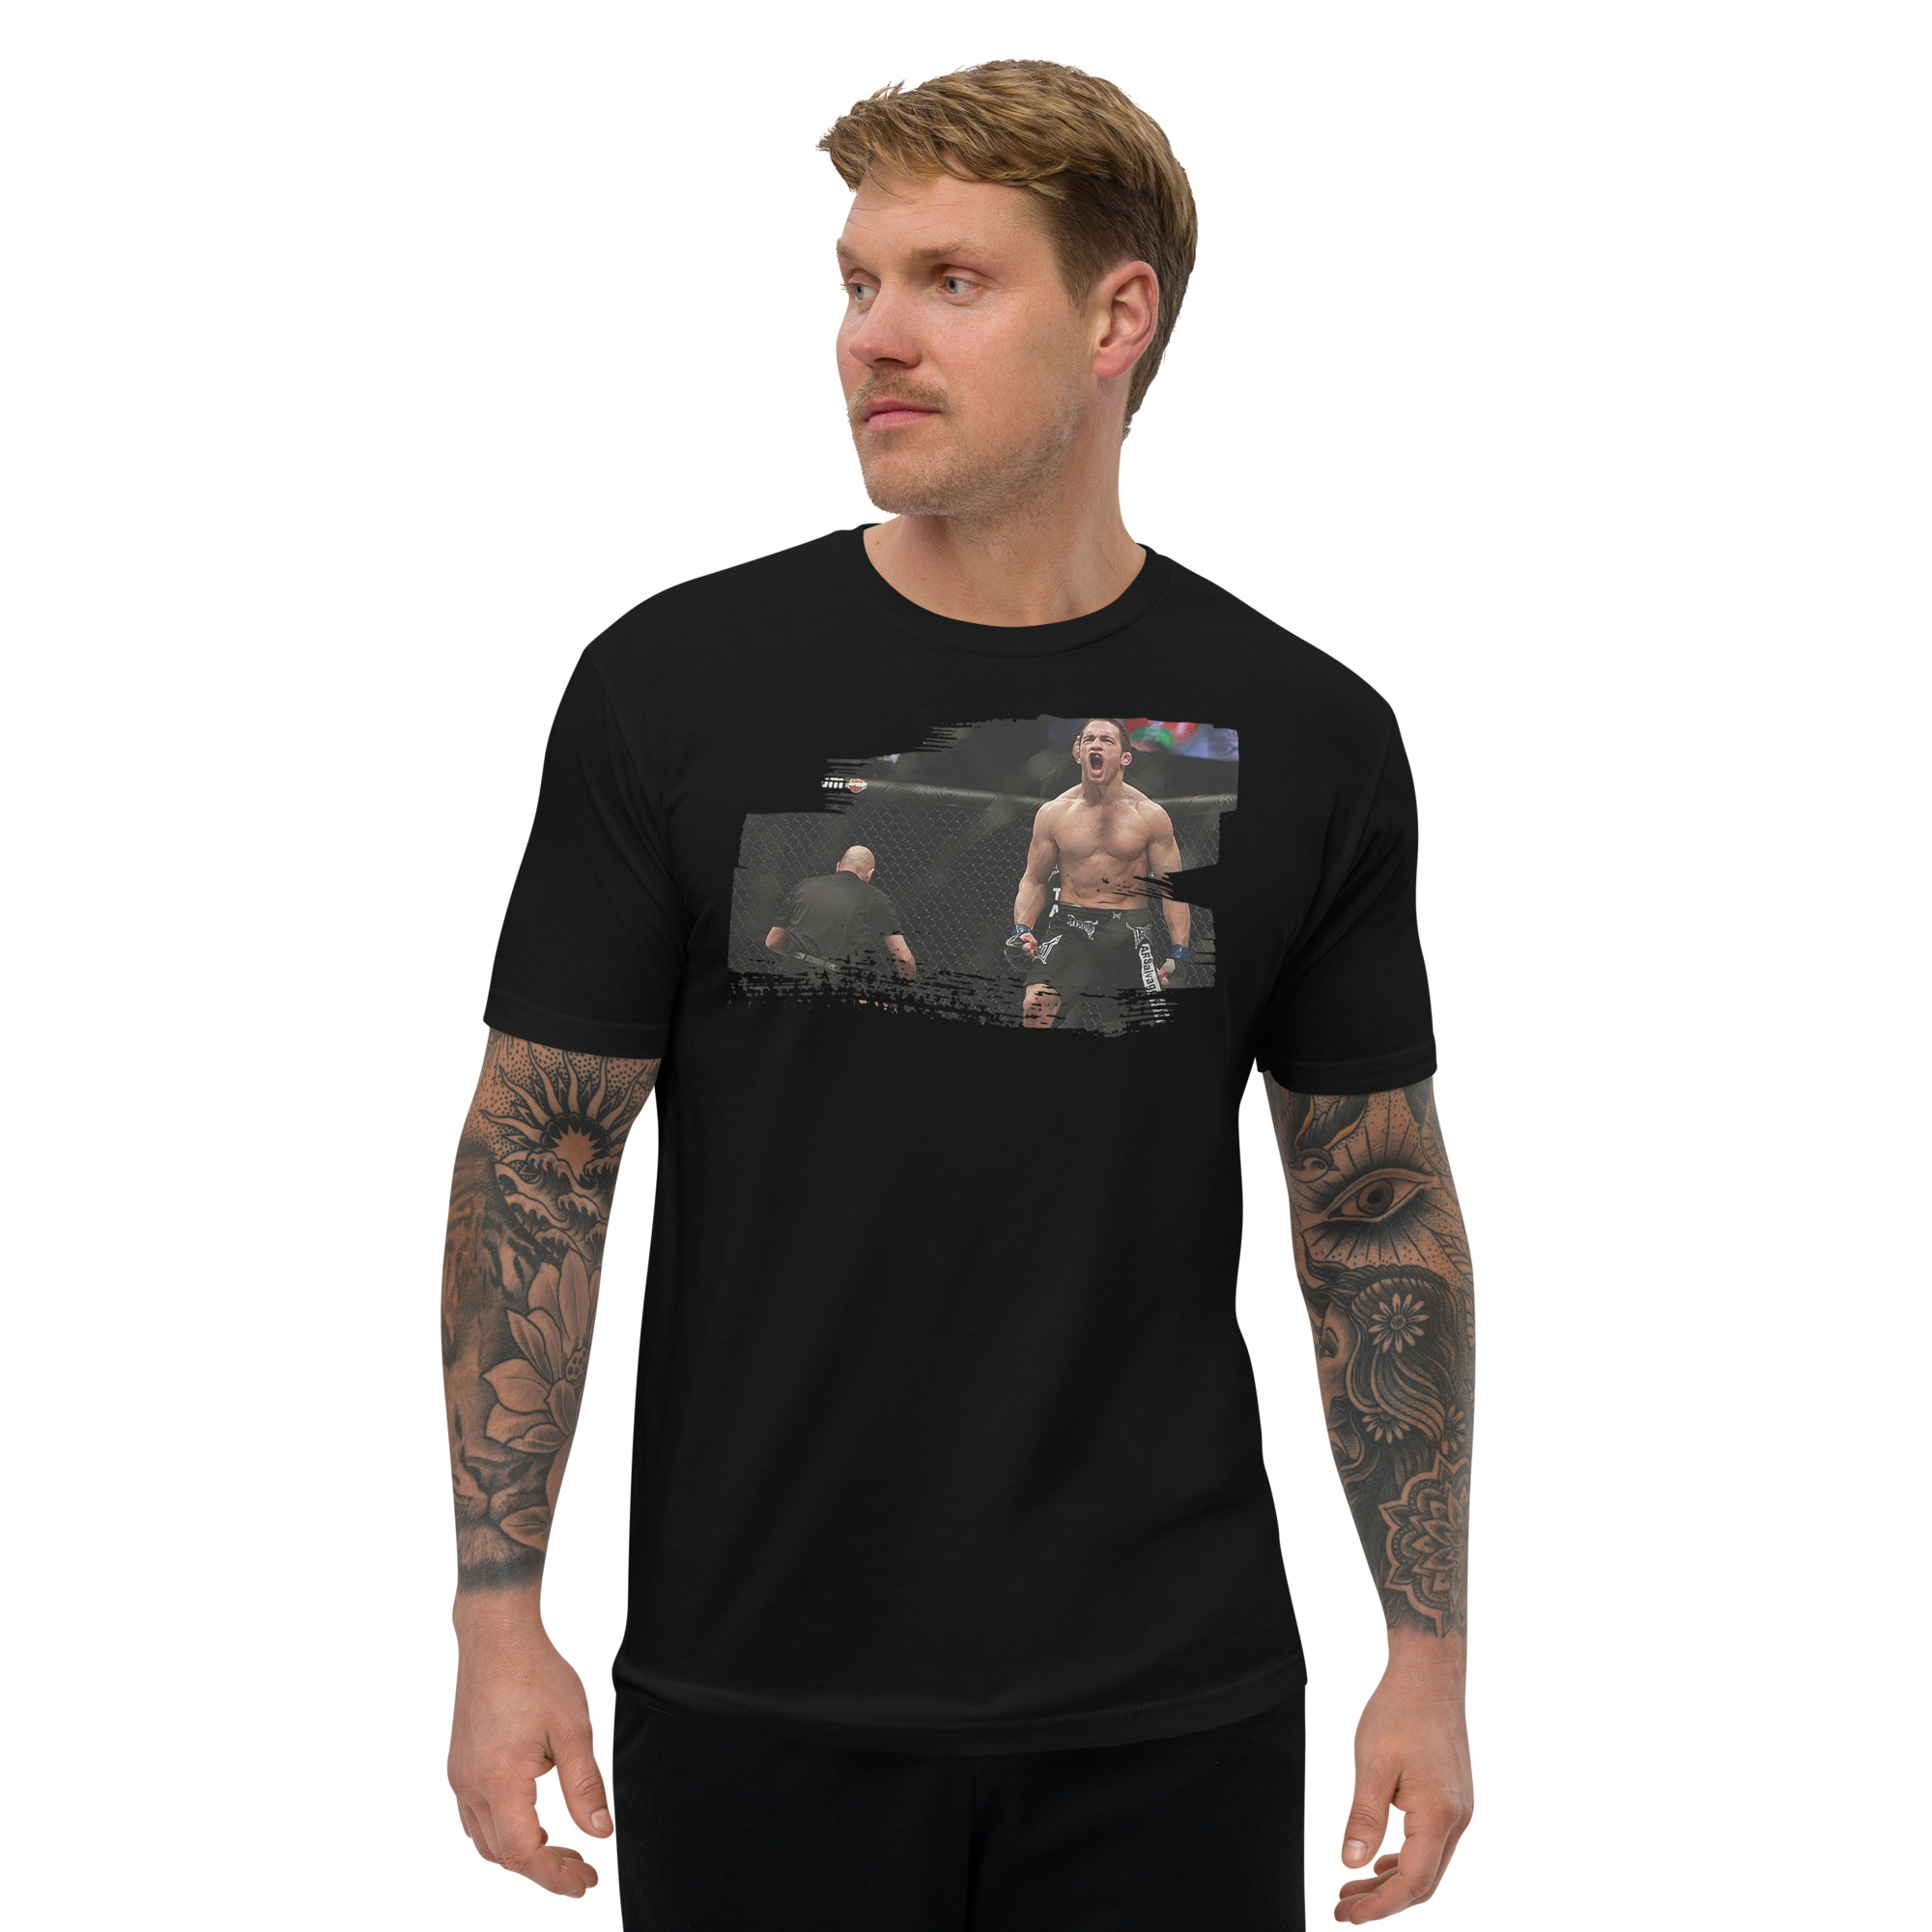 mens-fitted-t-shirt-black-front-63ddc8a2779e1.jpg